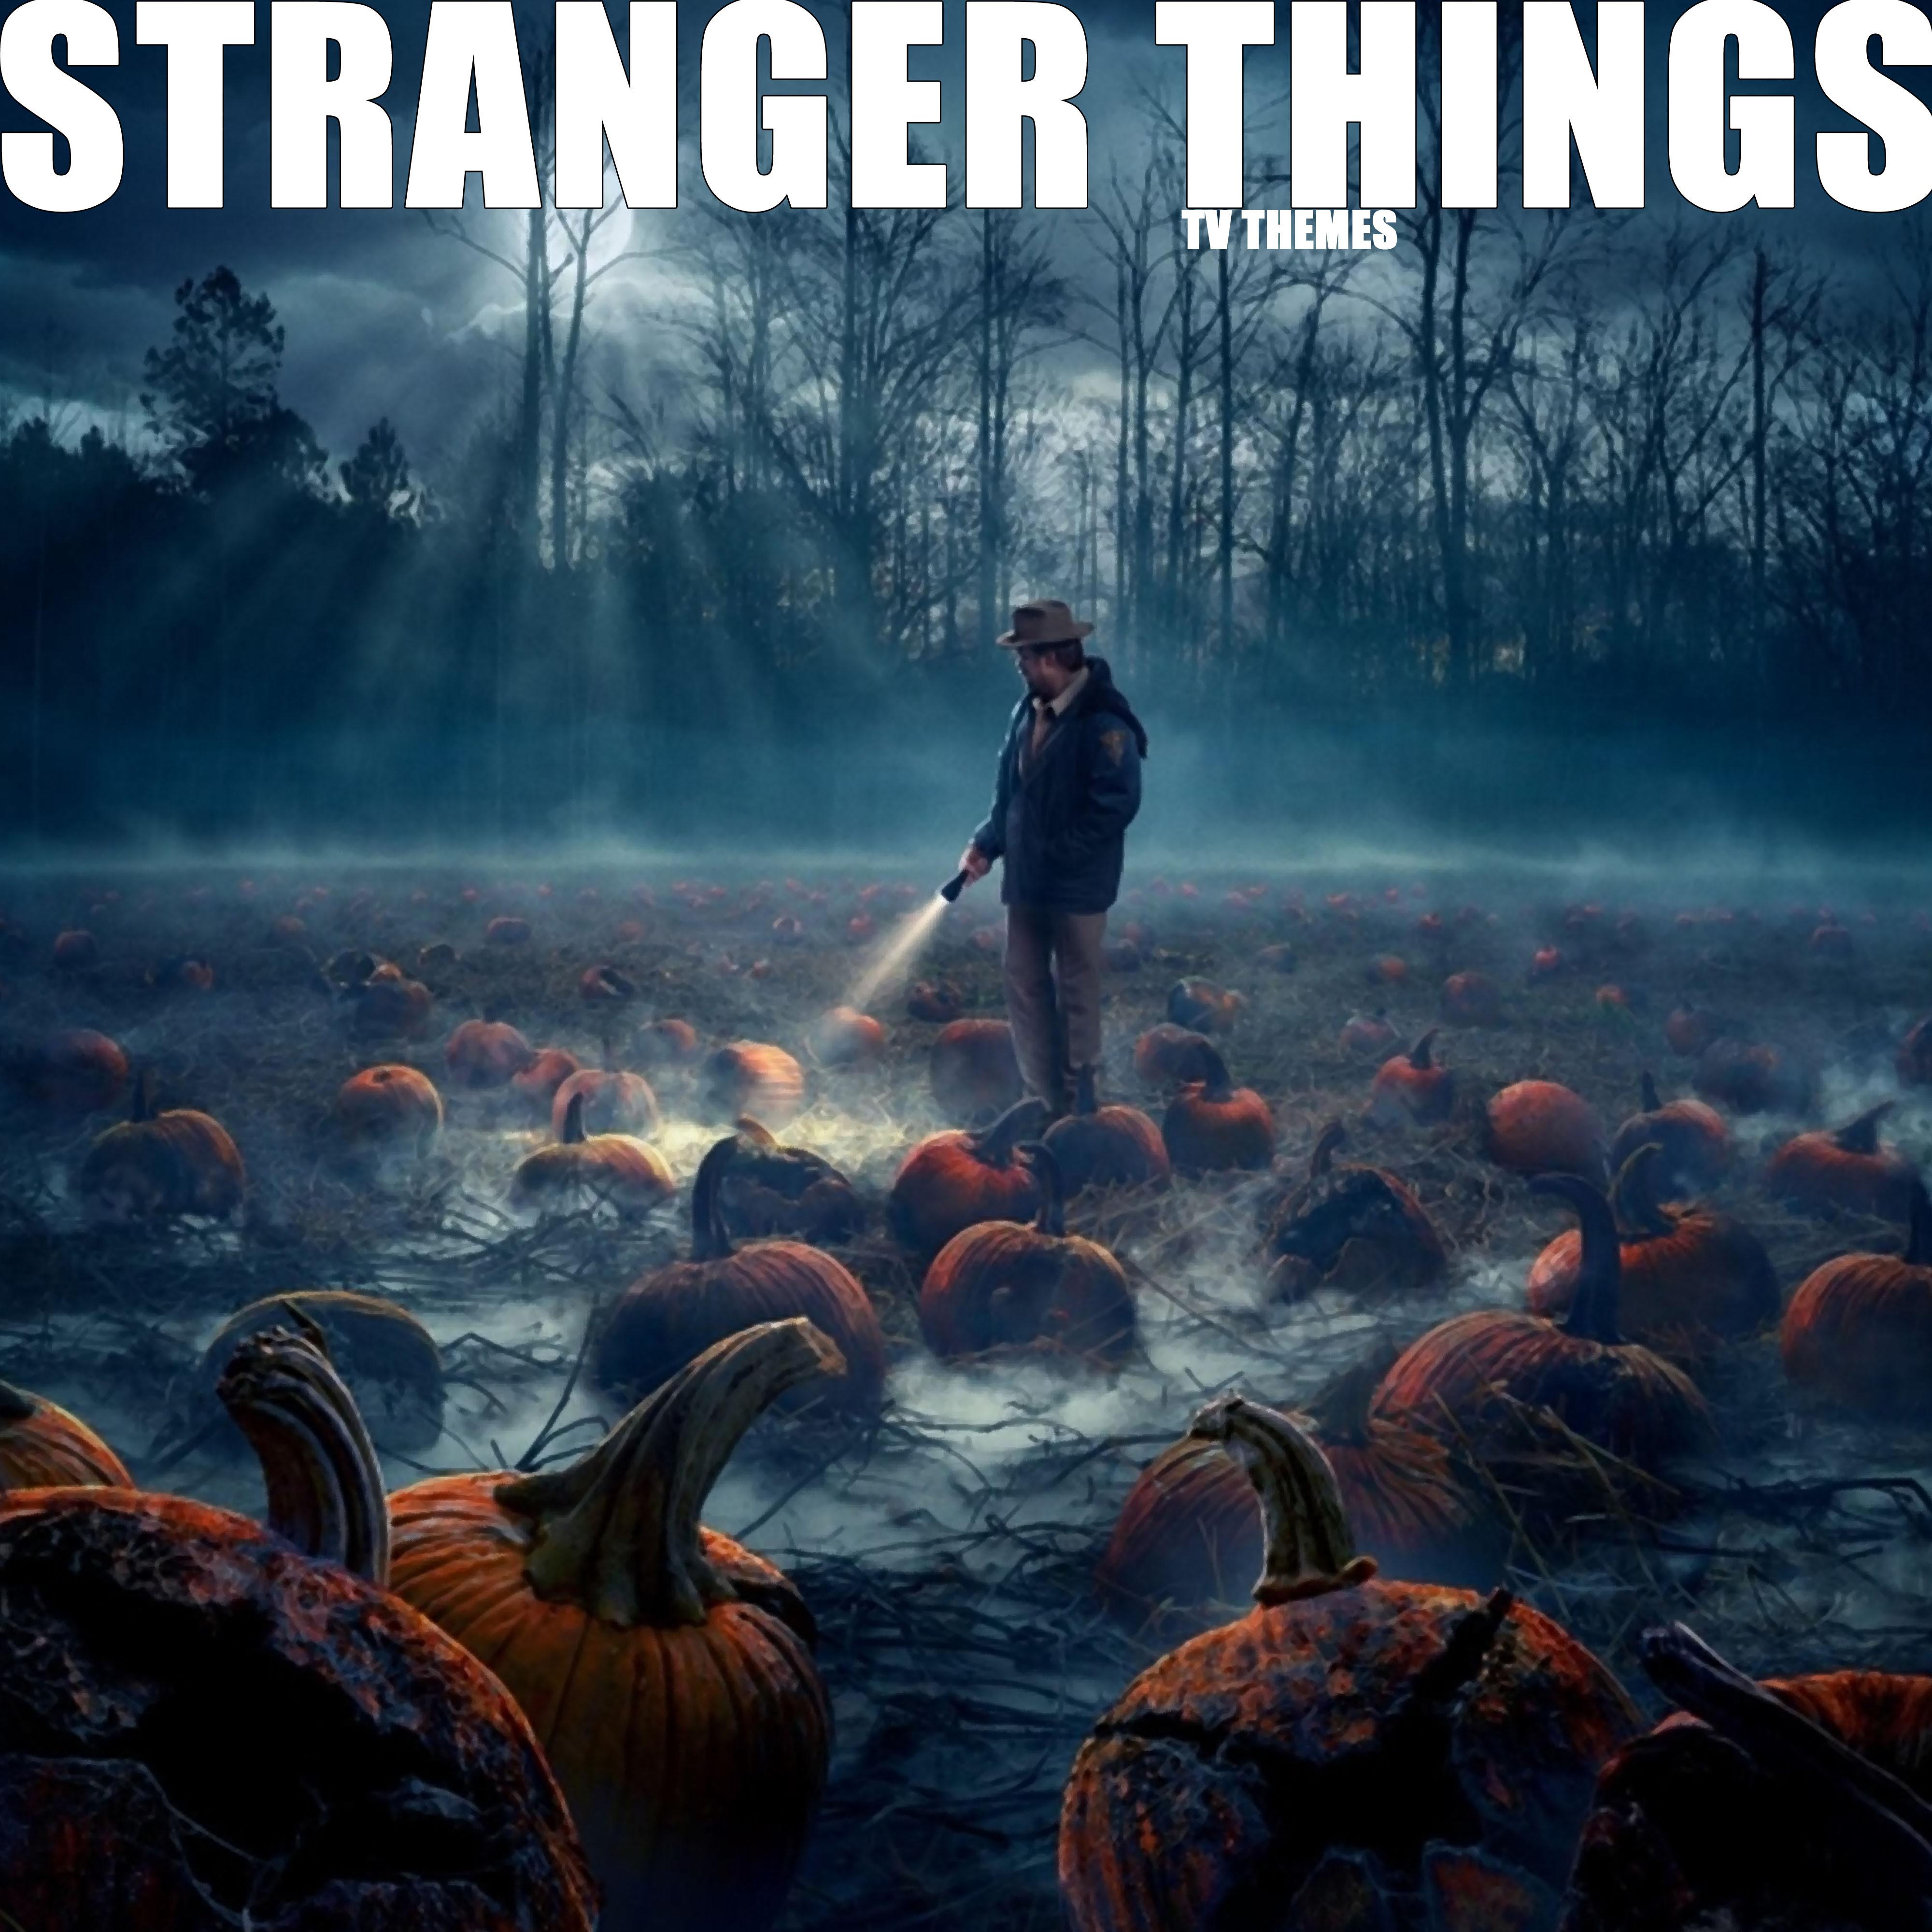 Stranger Things - The Iconic TV Theme